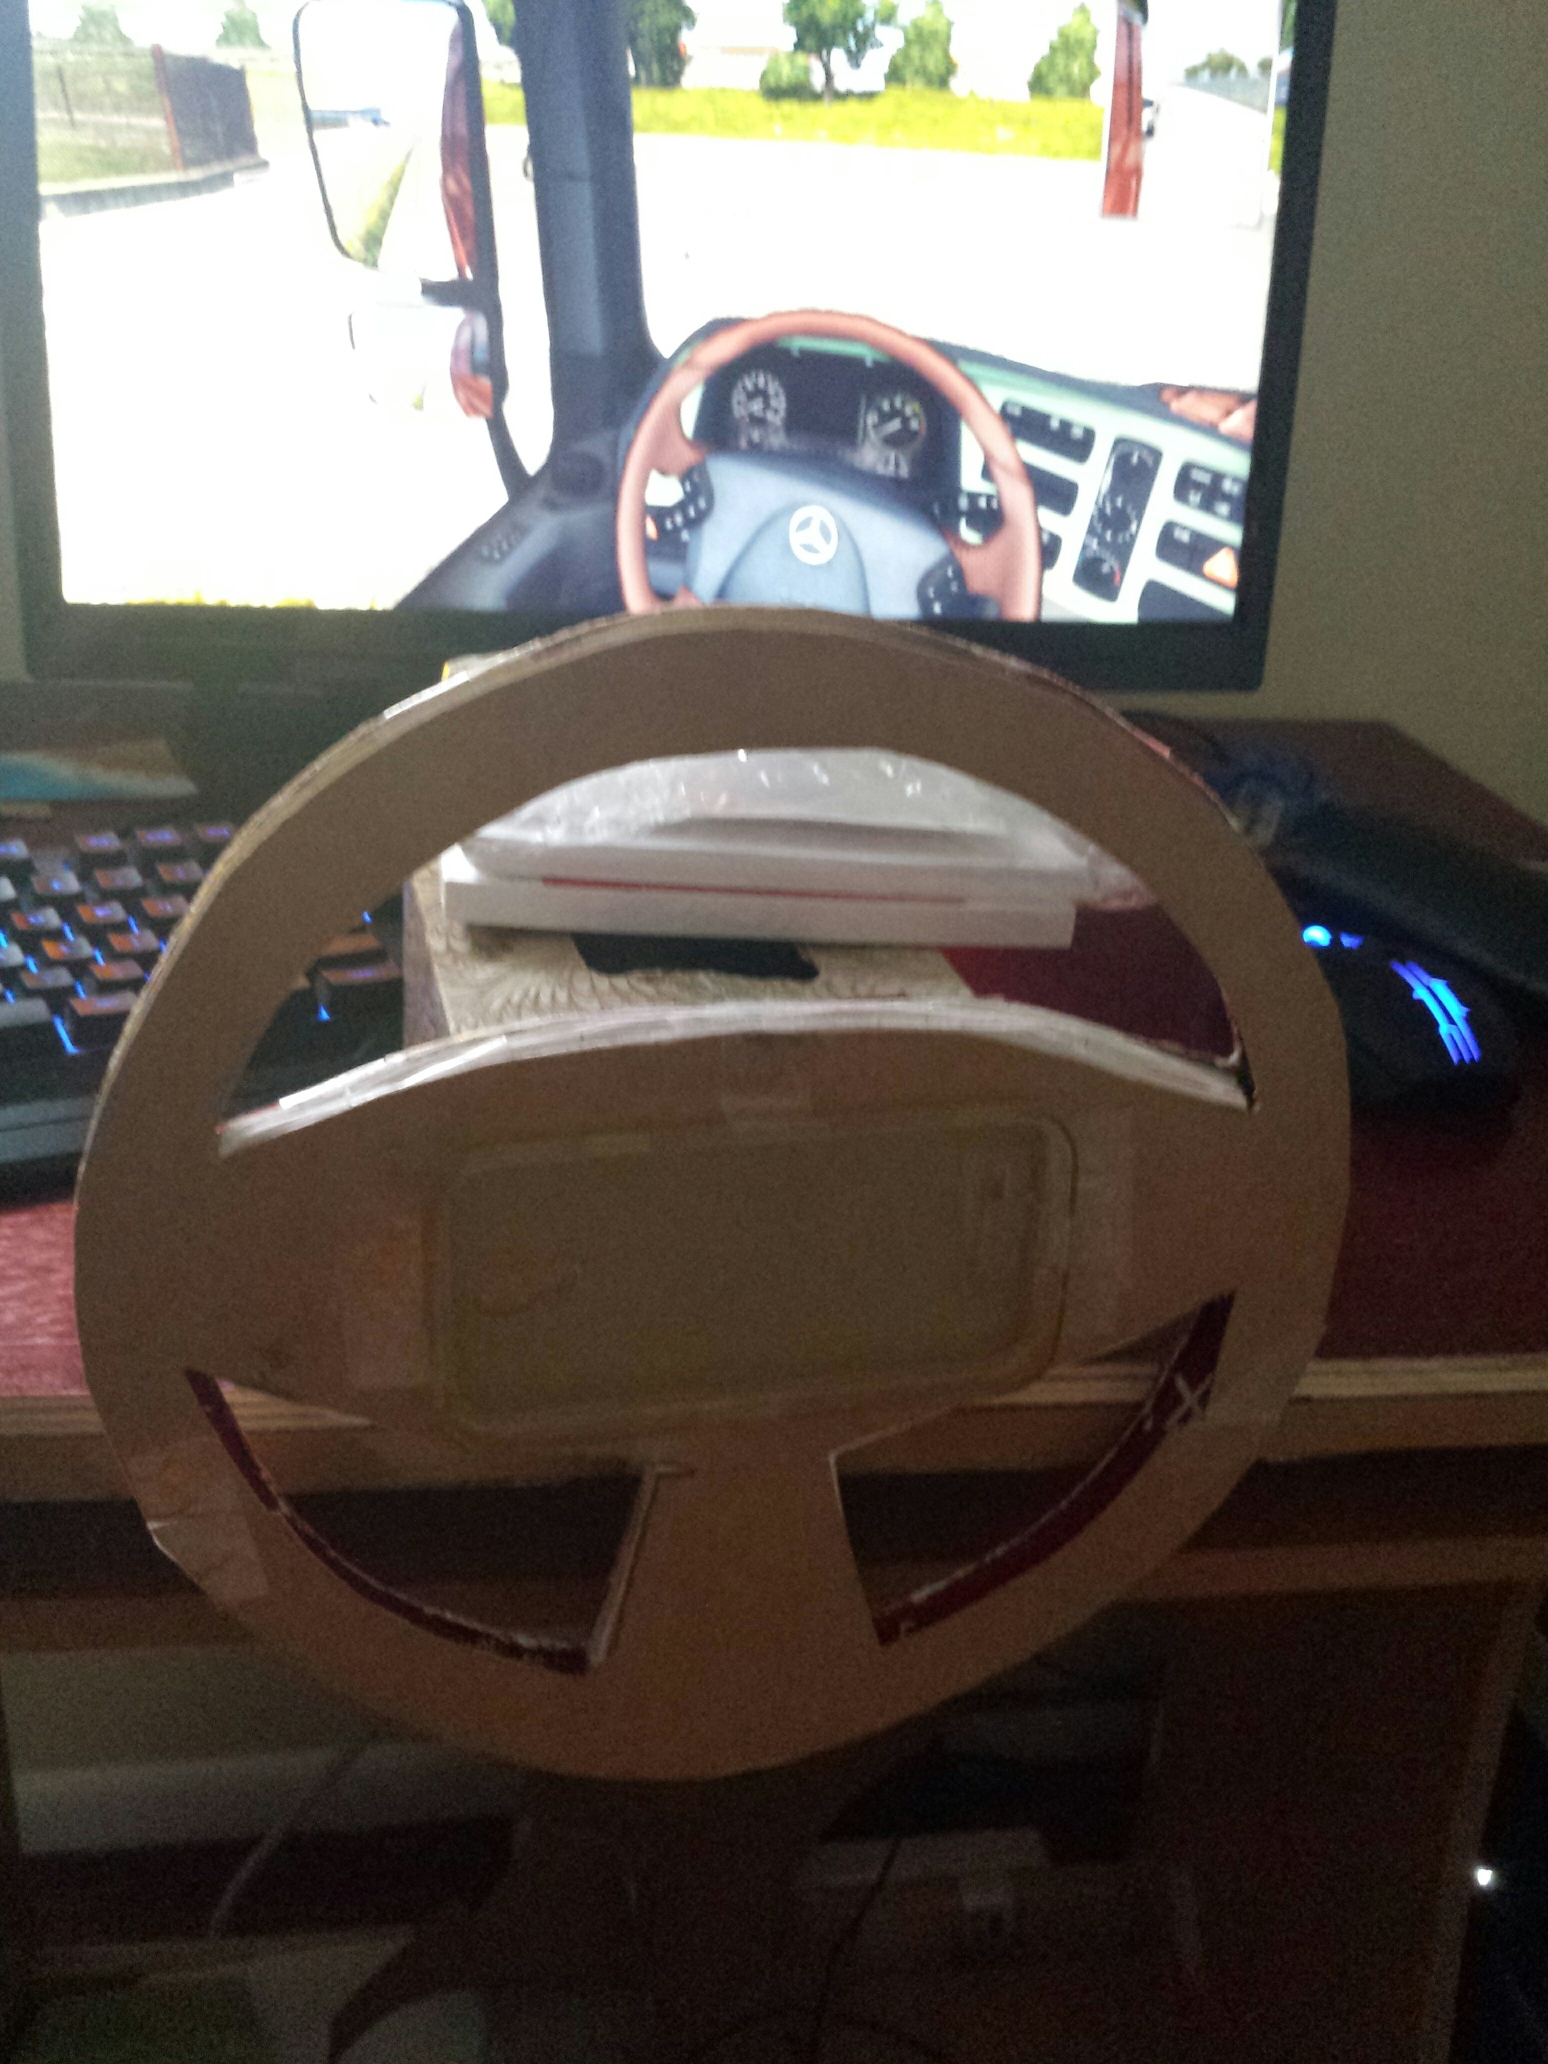 When your too broke to buy a racing wheel